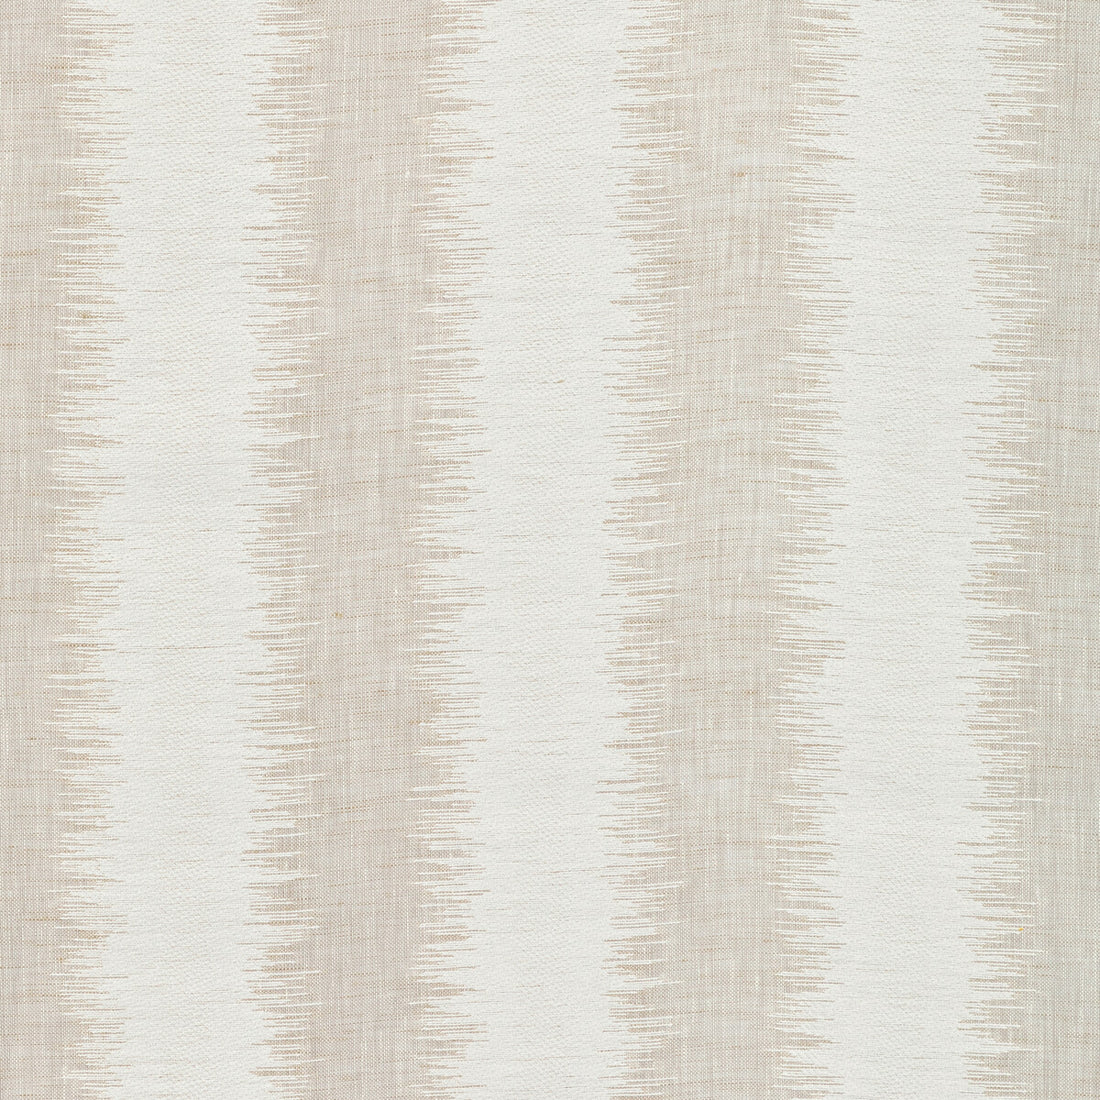 Pacific Lane fabric in linen color - pattern 4893.16.0 - by Kravet Design in the Jeffrey Alan Marks Seascapes collection